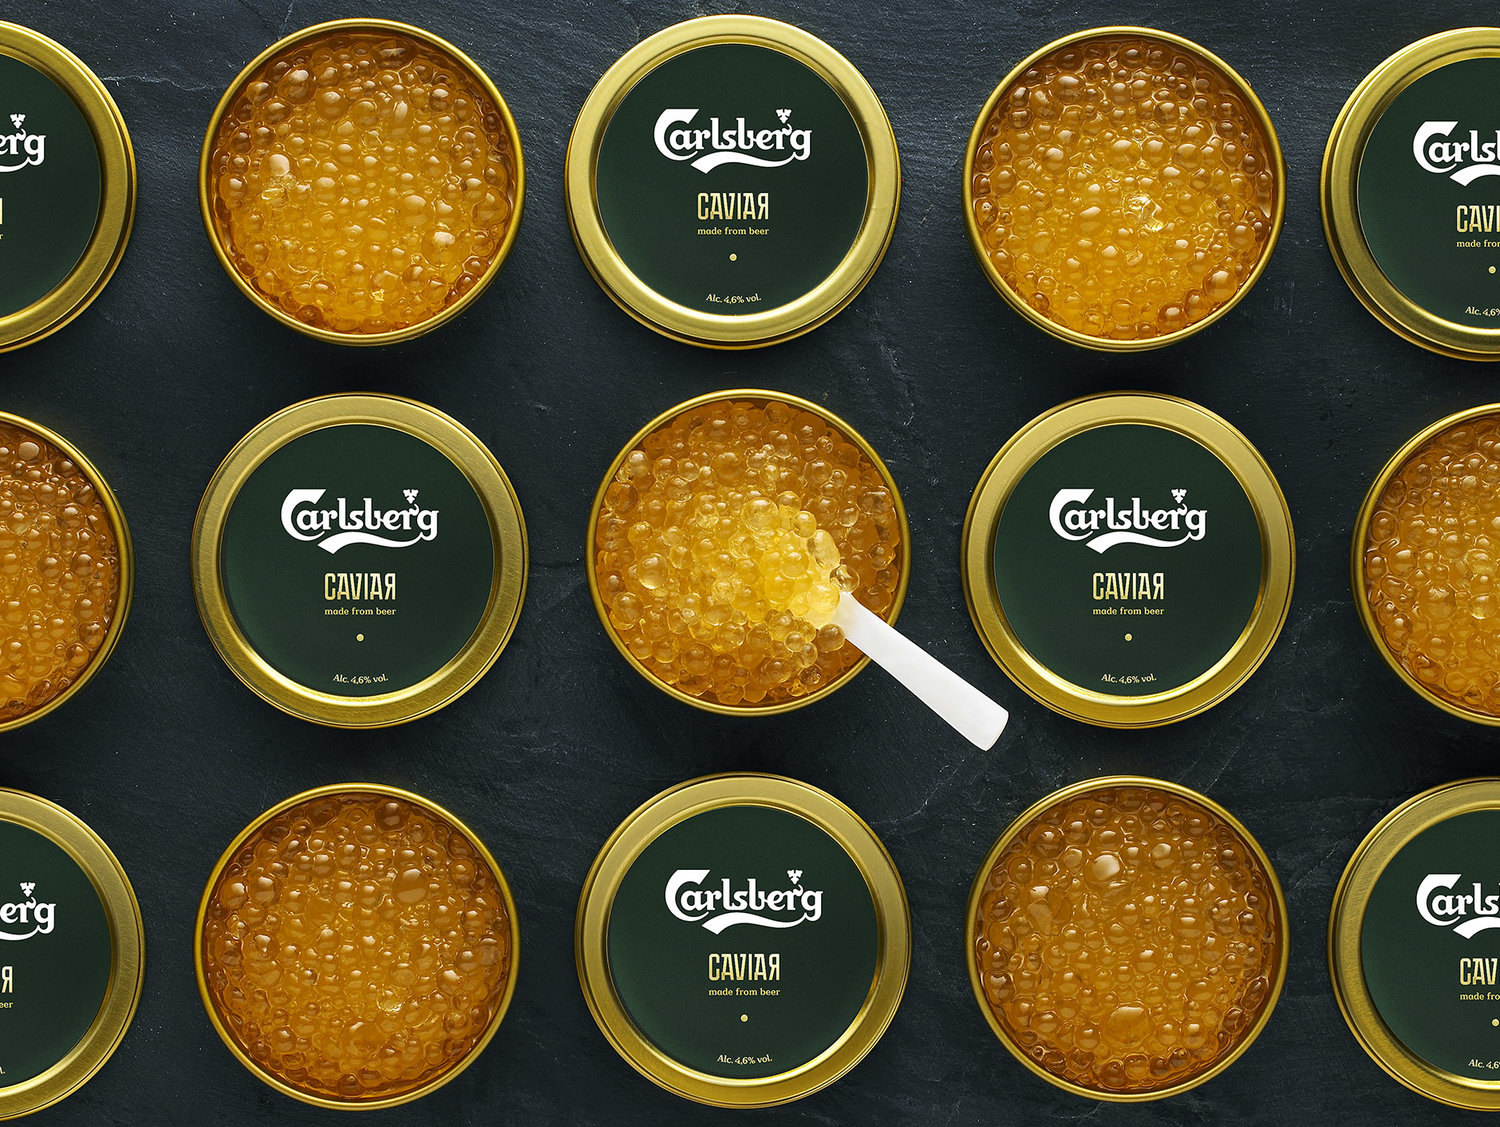 Carlsberg_Caviar_LowRes_Collection